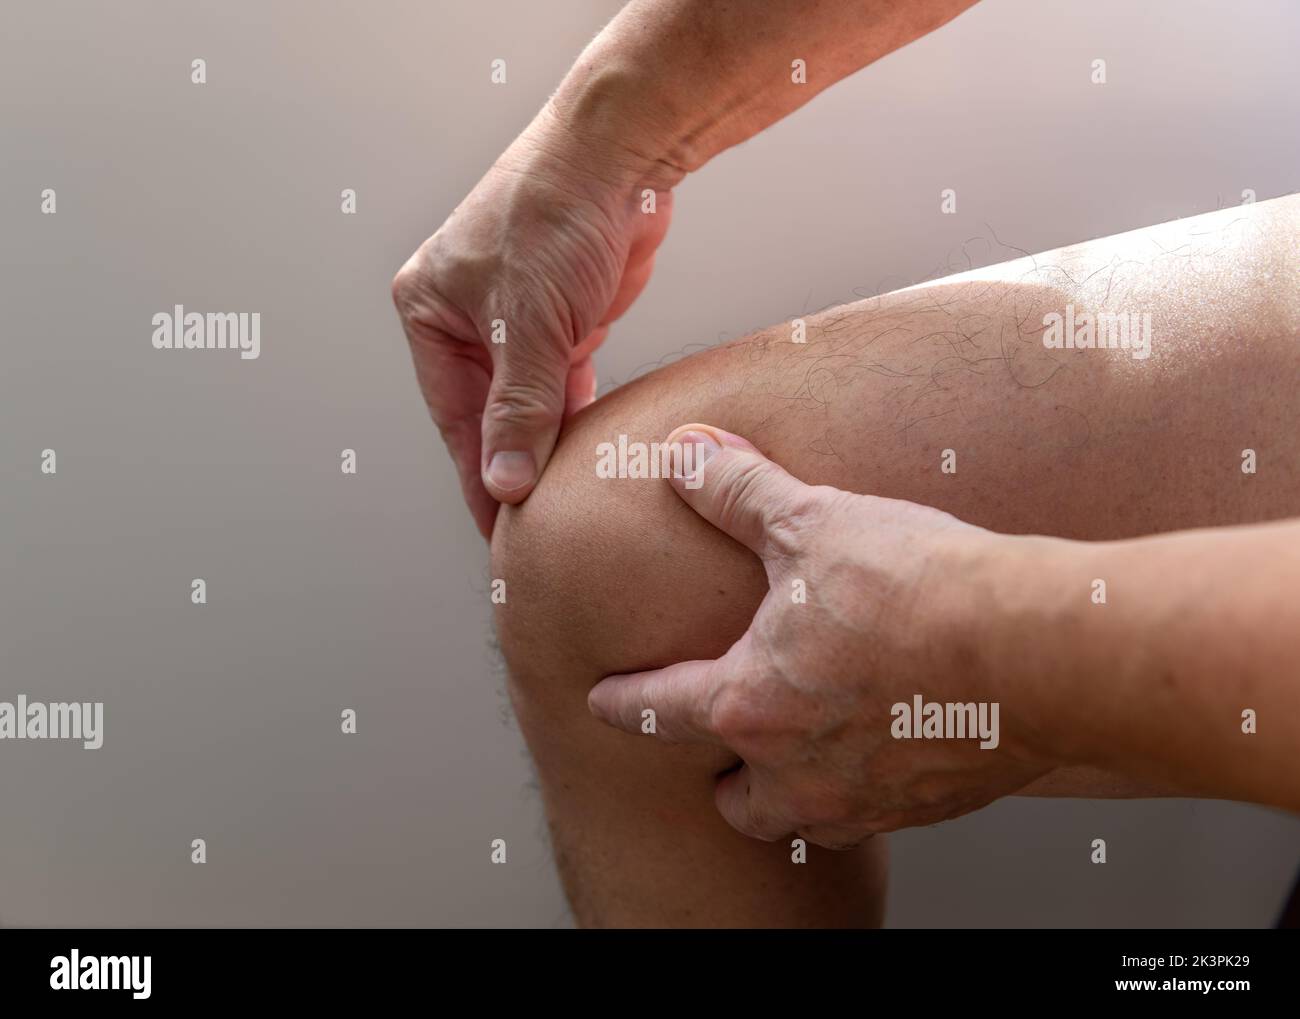 A person with knee pain massaging it for relief. Injuries. Arthritis. Stock Photo